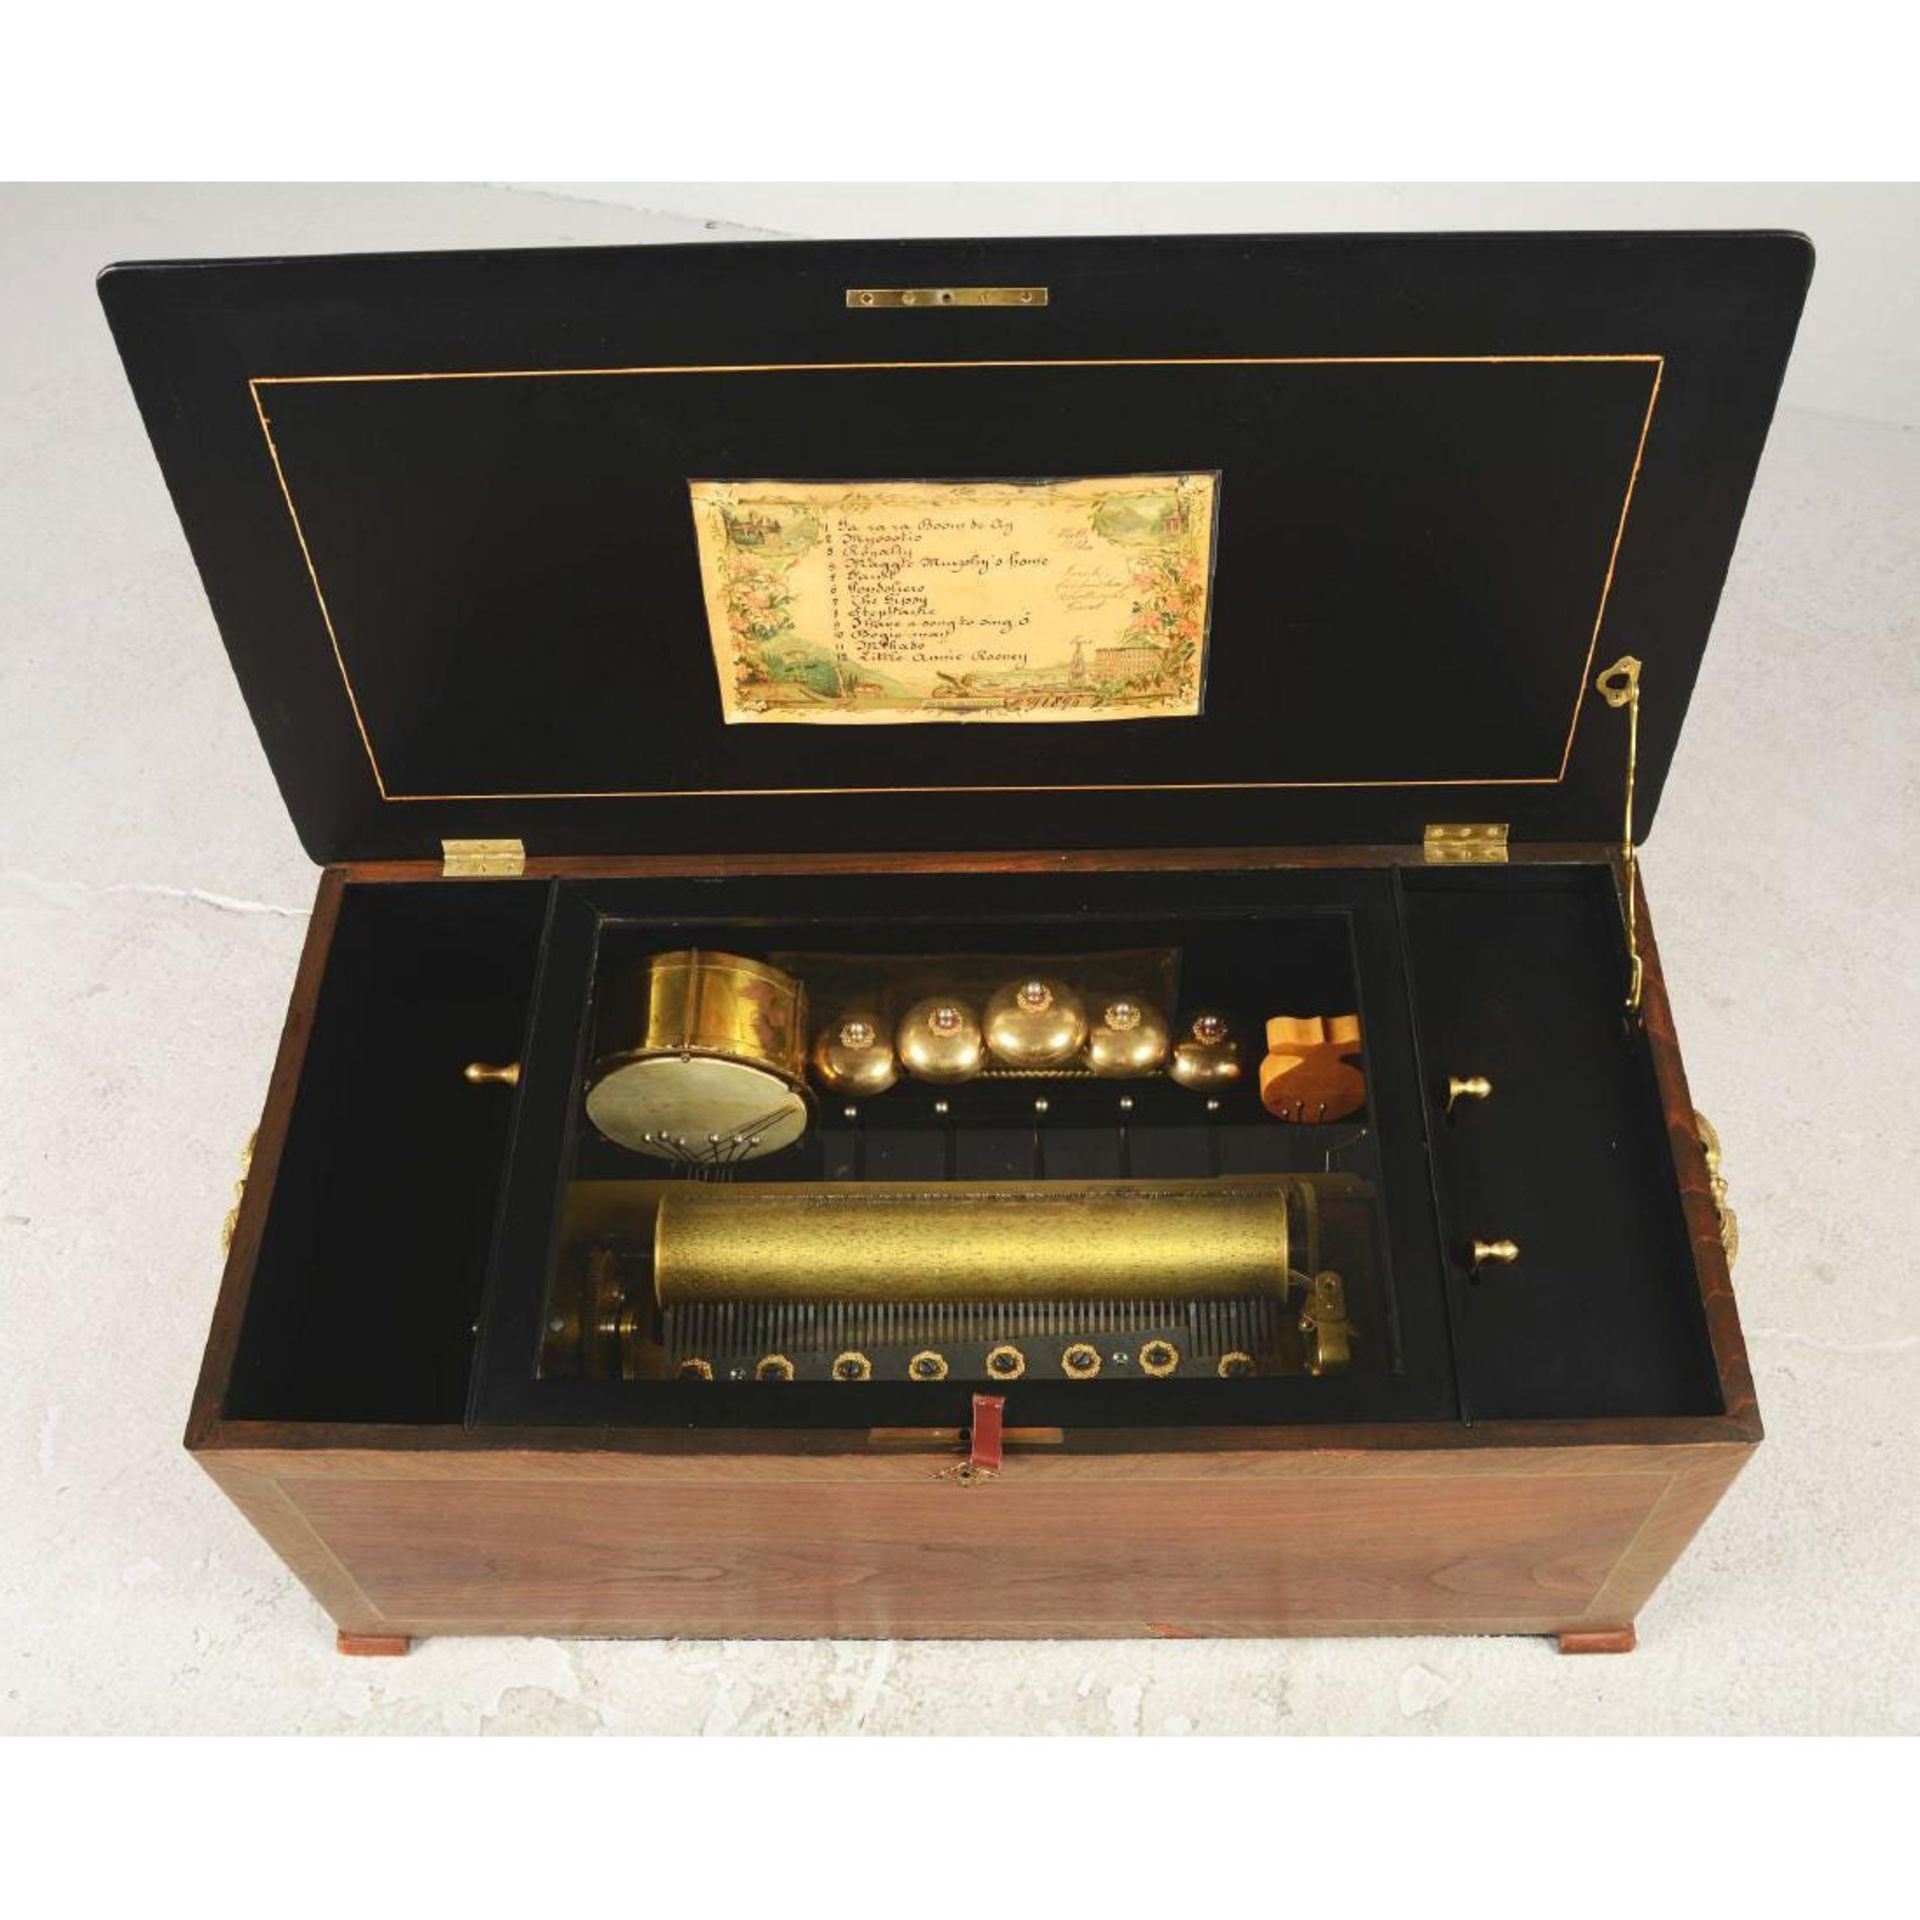 Swiss 12 Tune Orchestrial Music Box - Image 2 of 6